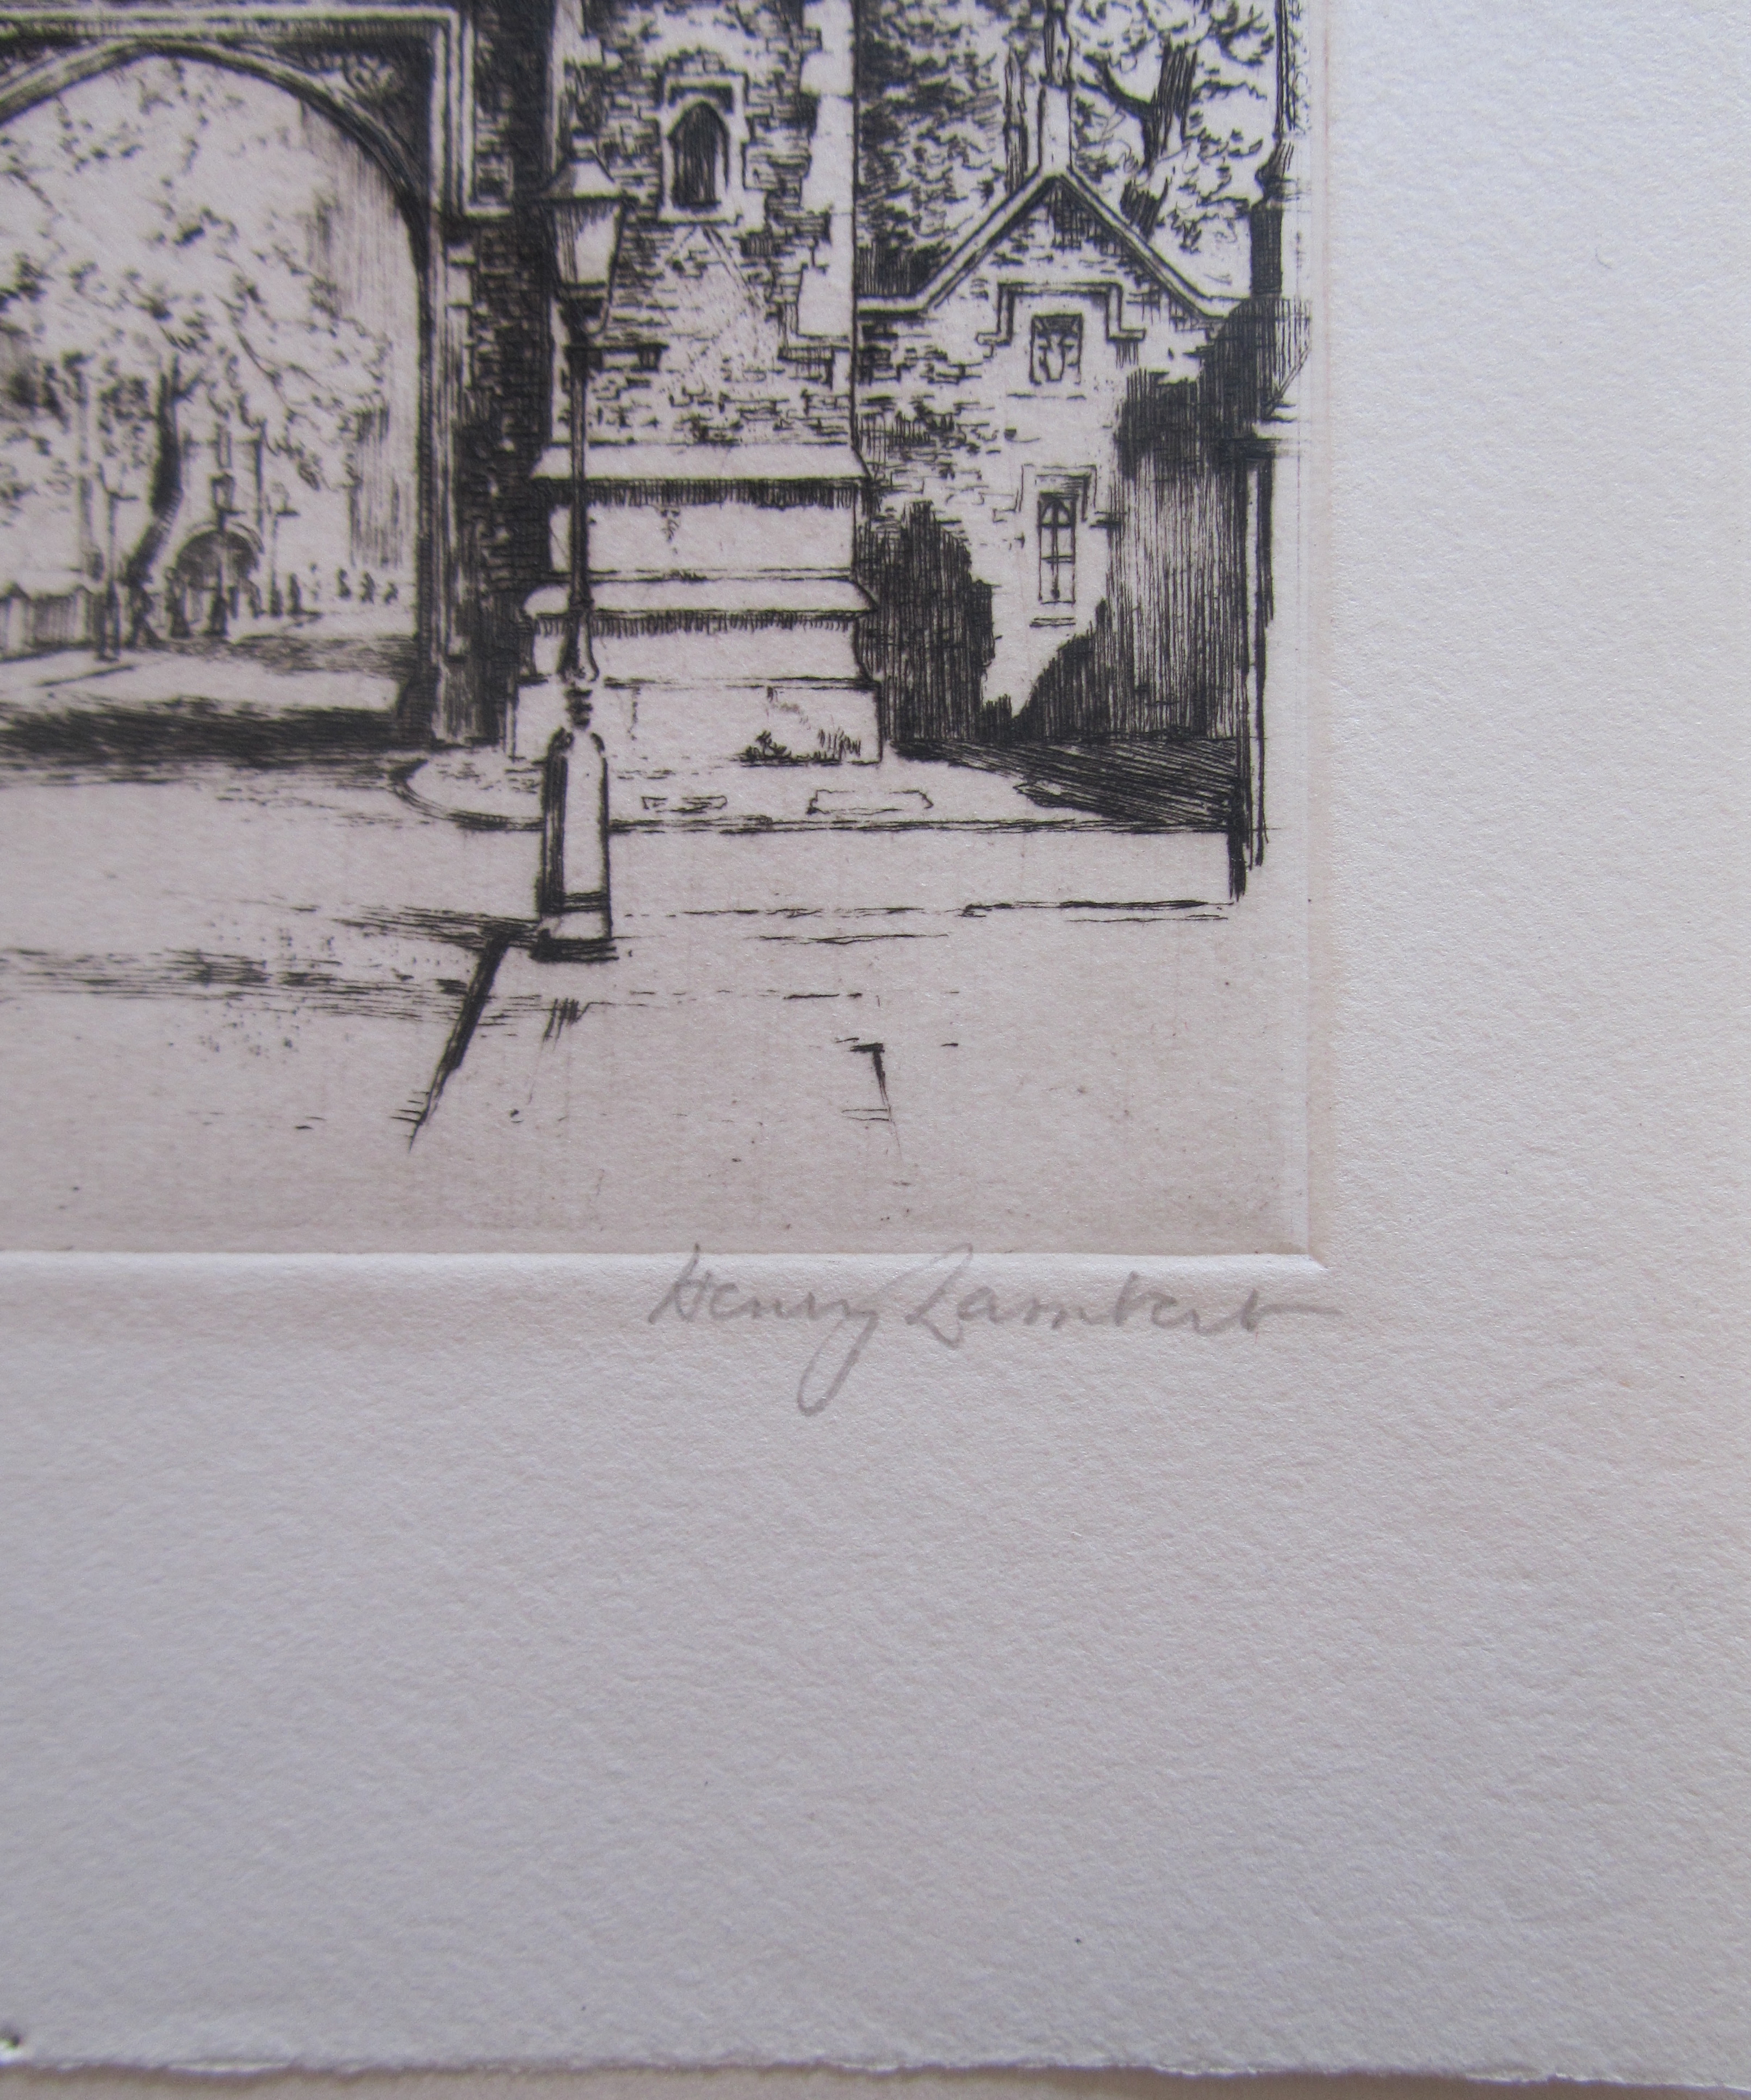 Terence Henry Lambert (British, b.1891) 'Piccadilly Circus' & Lincoln's Inn' London, etchings - Image 3 of 5